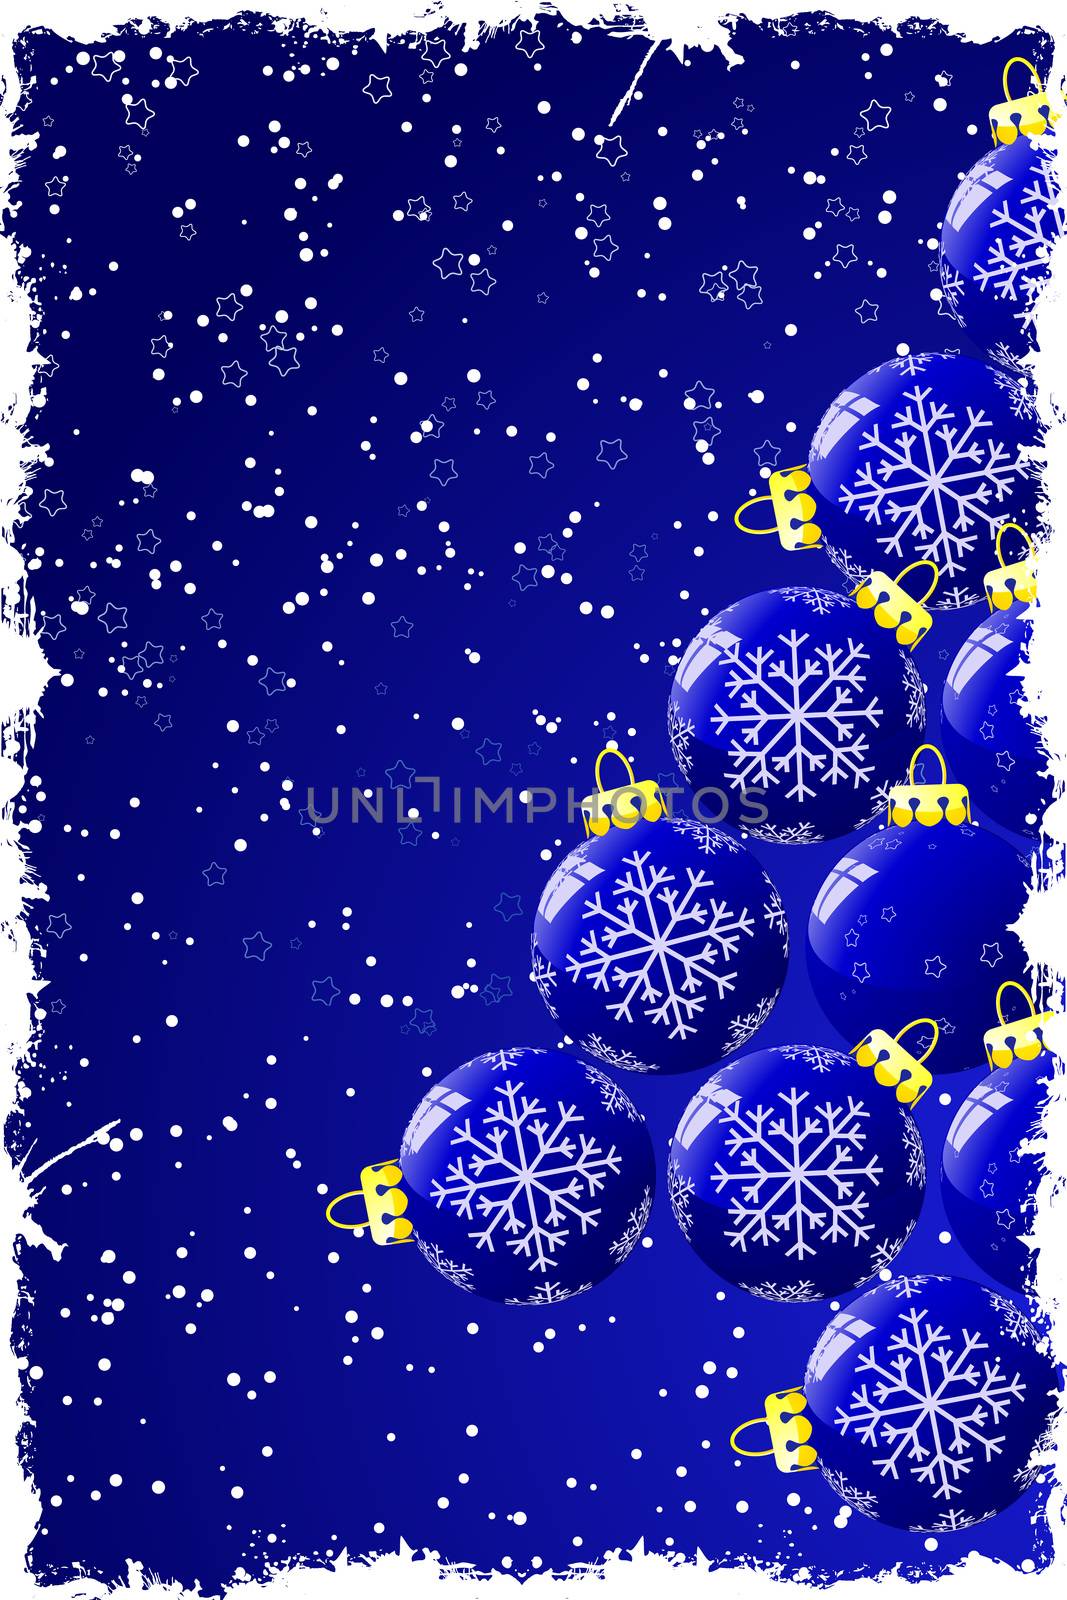 Grunge Christmas background with baubles and snowflakes